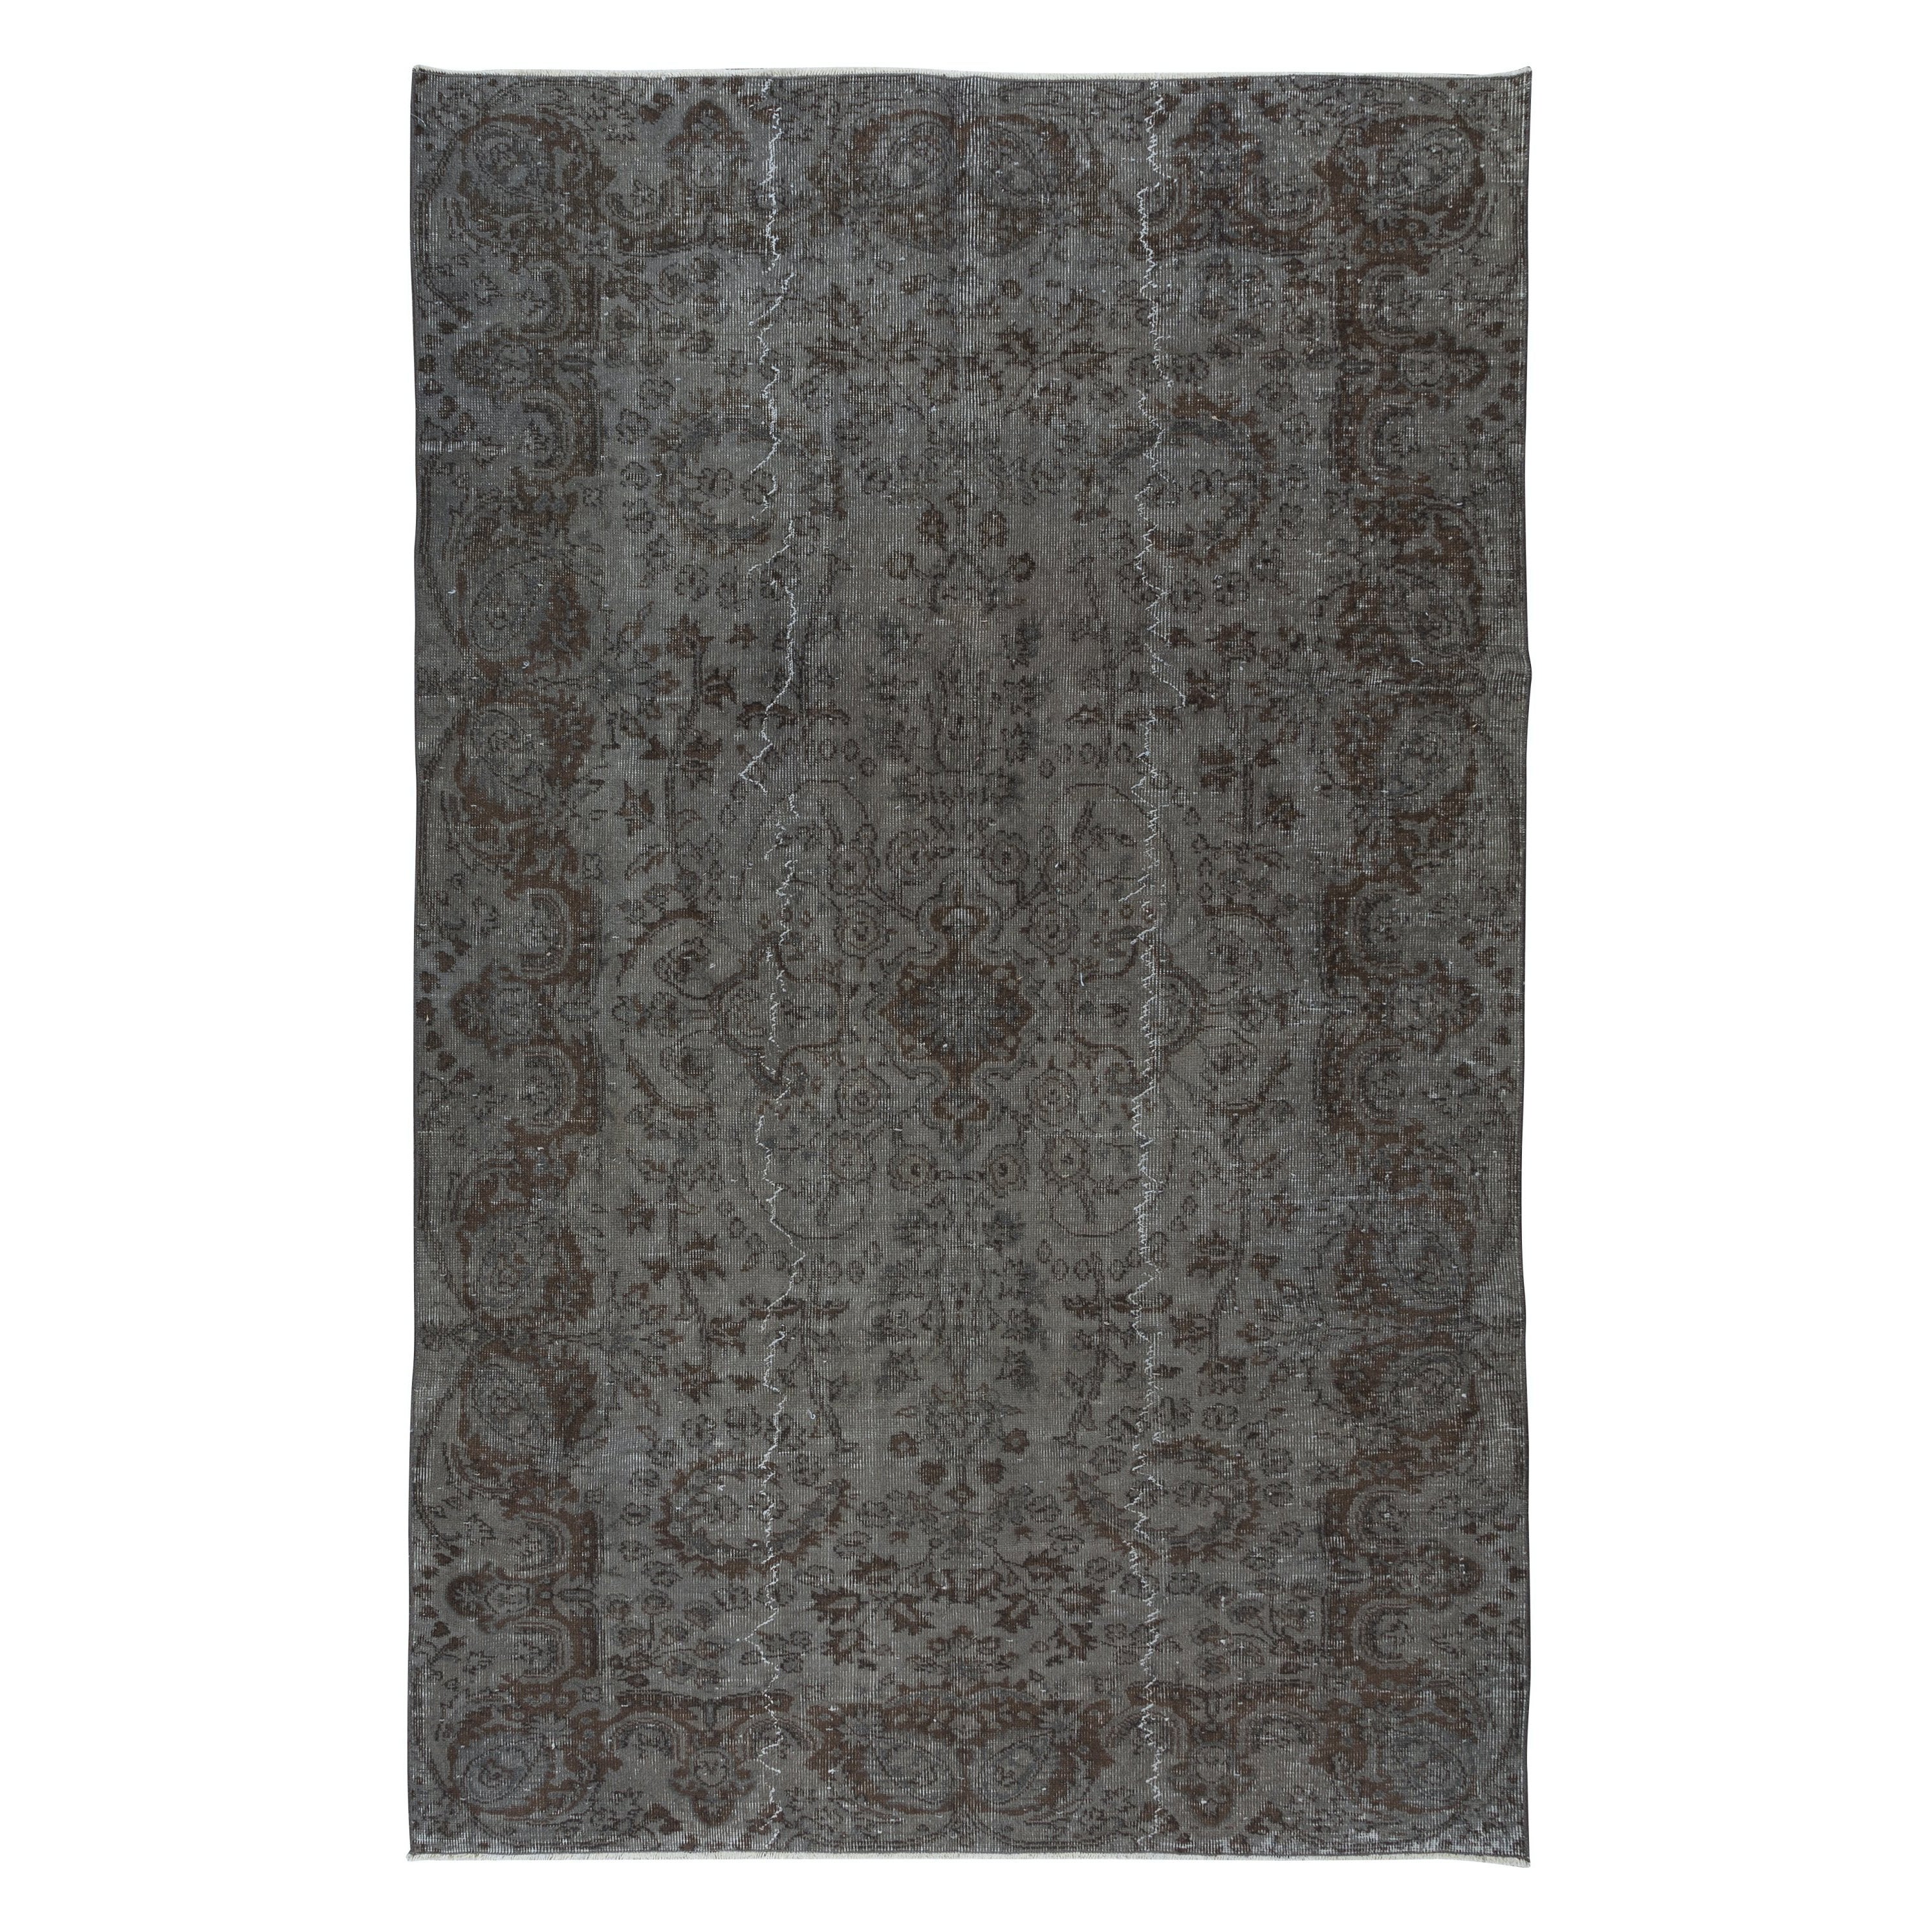 5.7x8.7 Ft Rustic Handmade Turkish Sparta Area Rug. Gray & Brown Colors For Sale